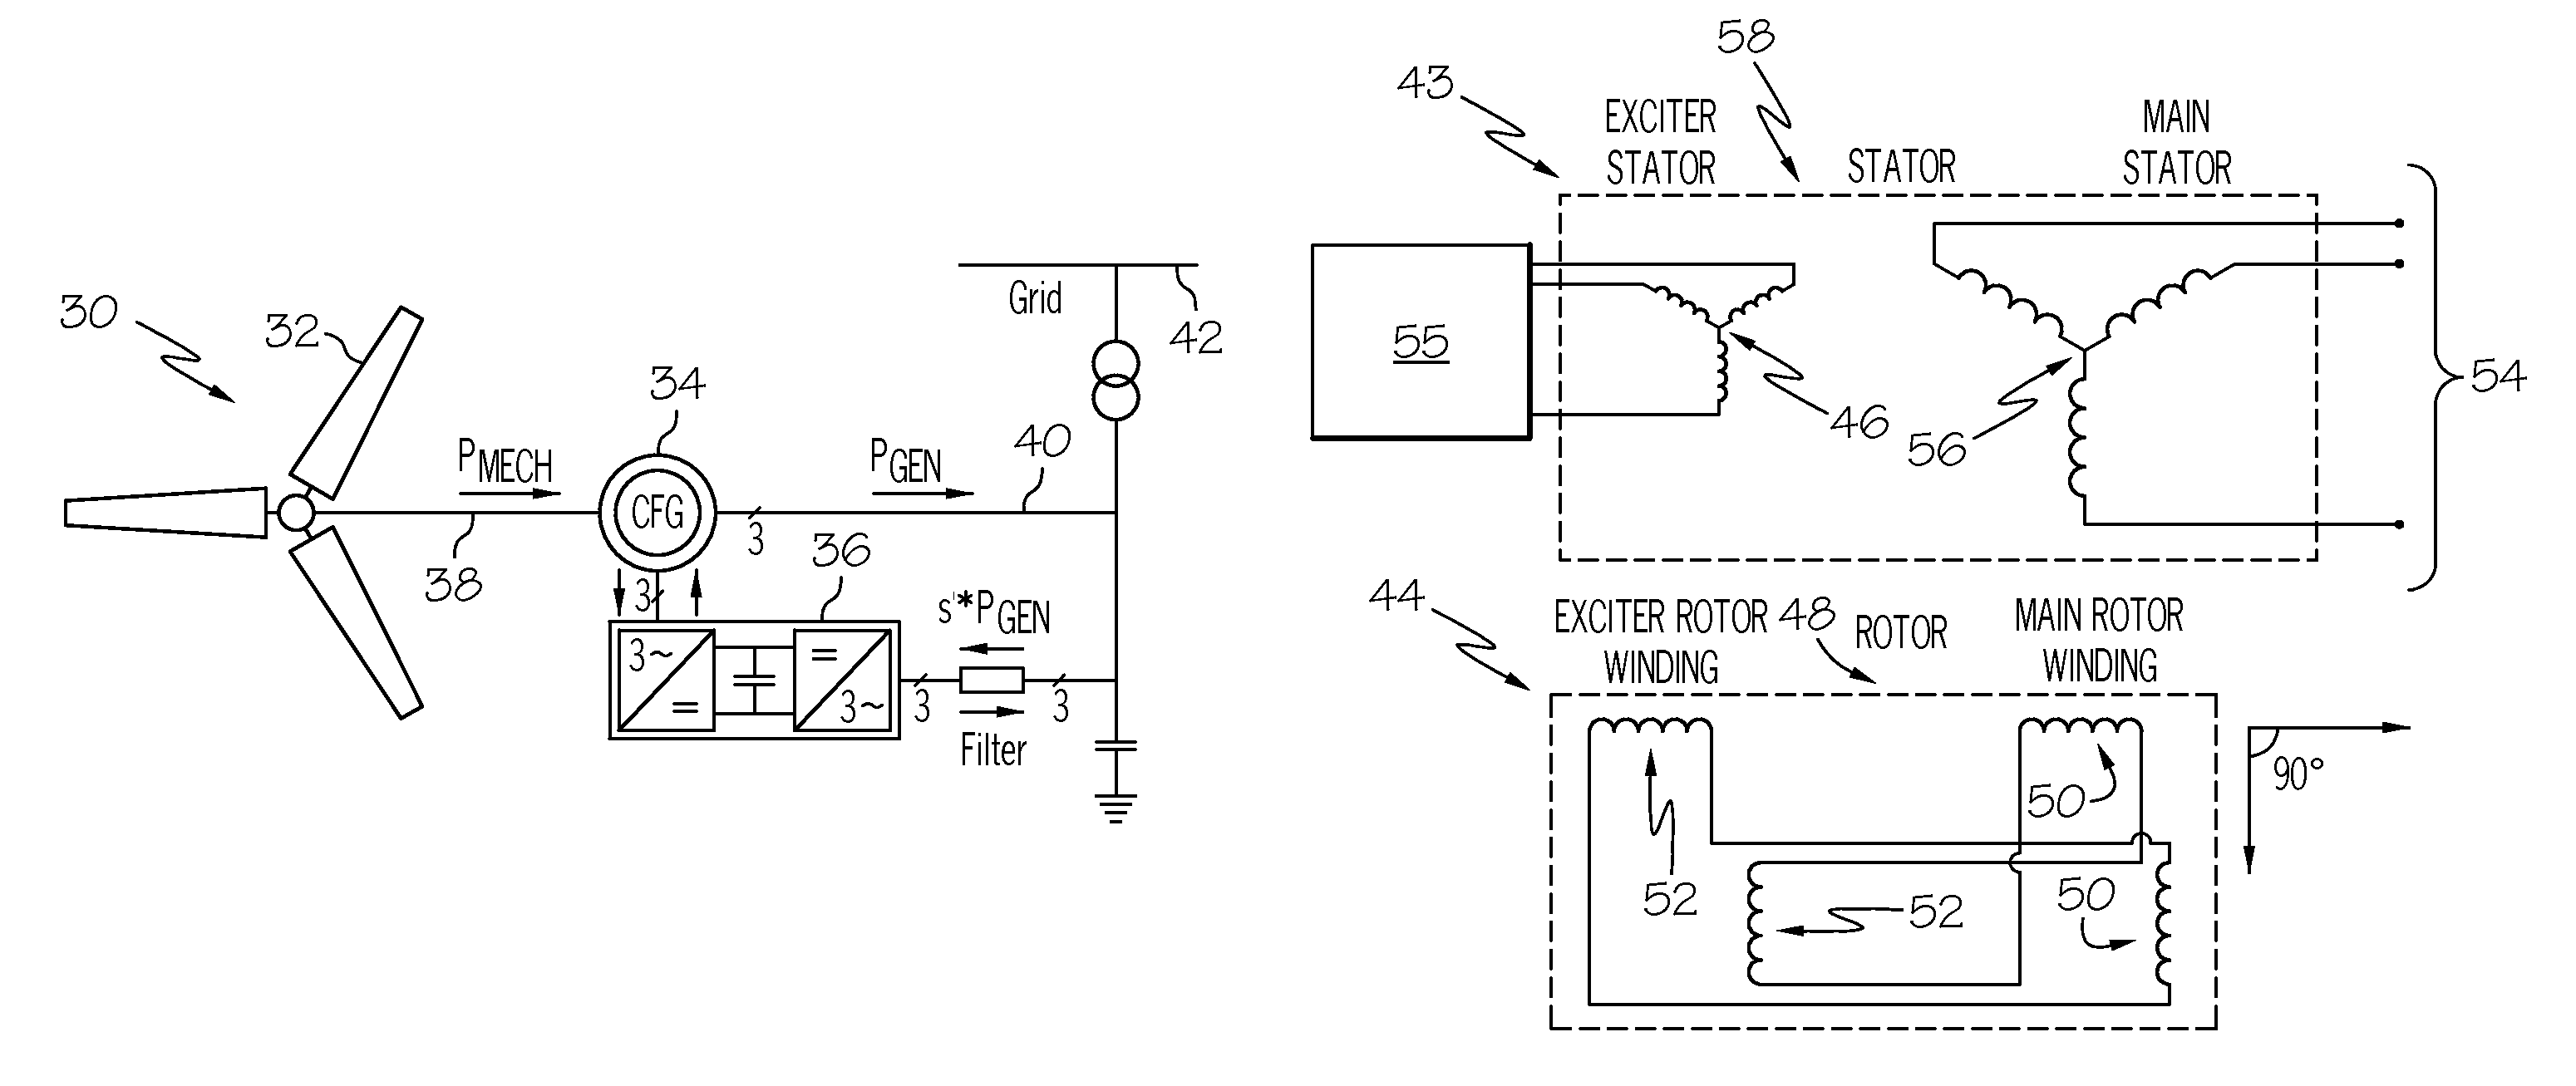 Multi-stage controlled frequency generator for direct-drive wind power